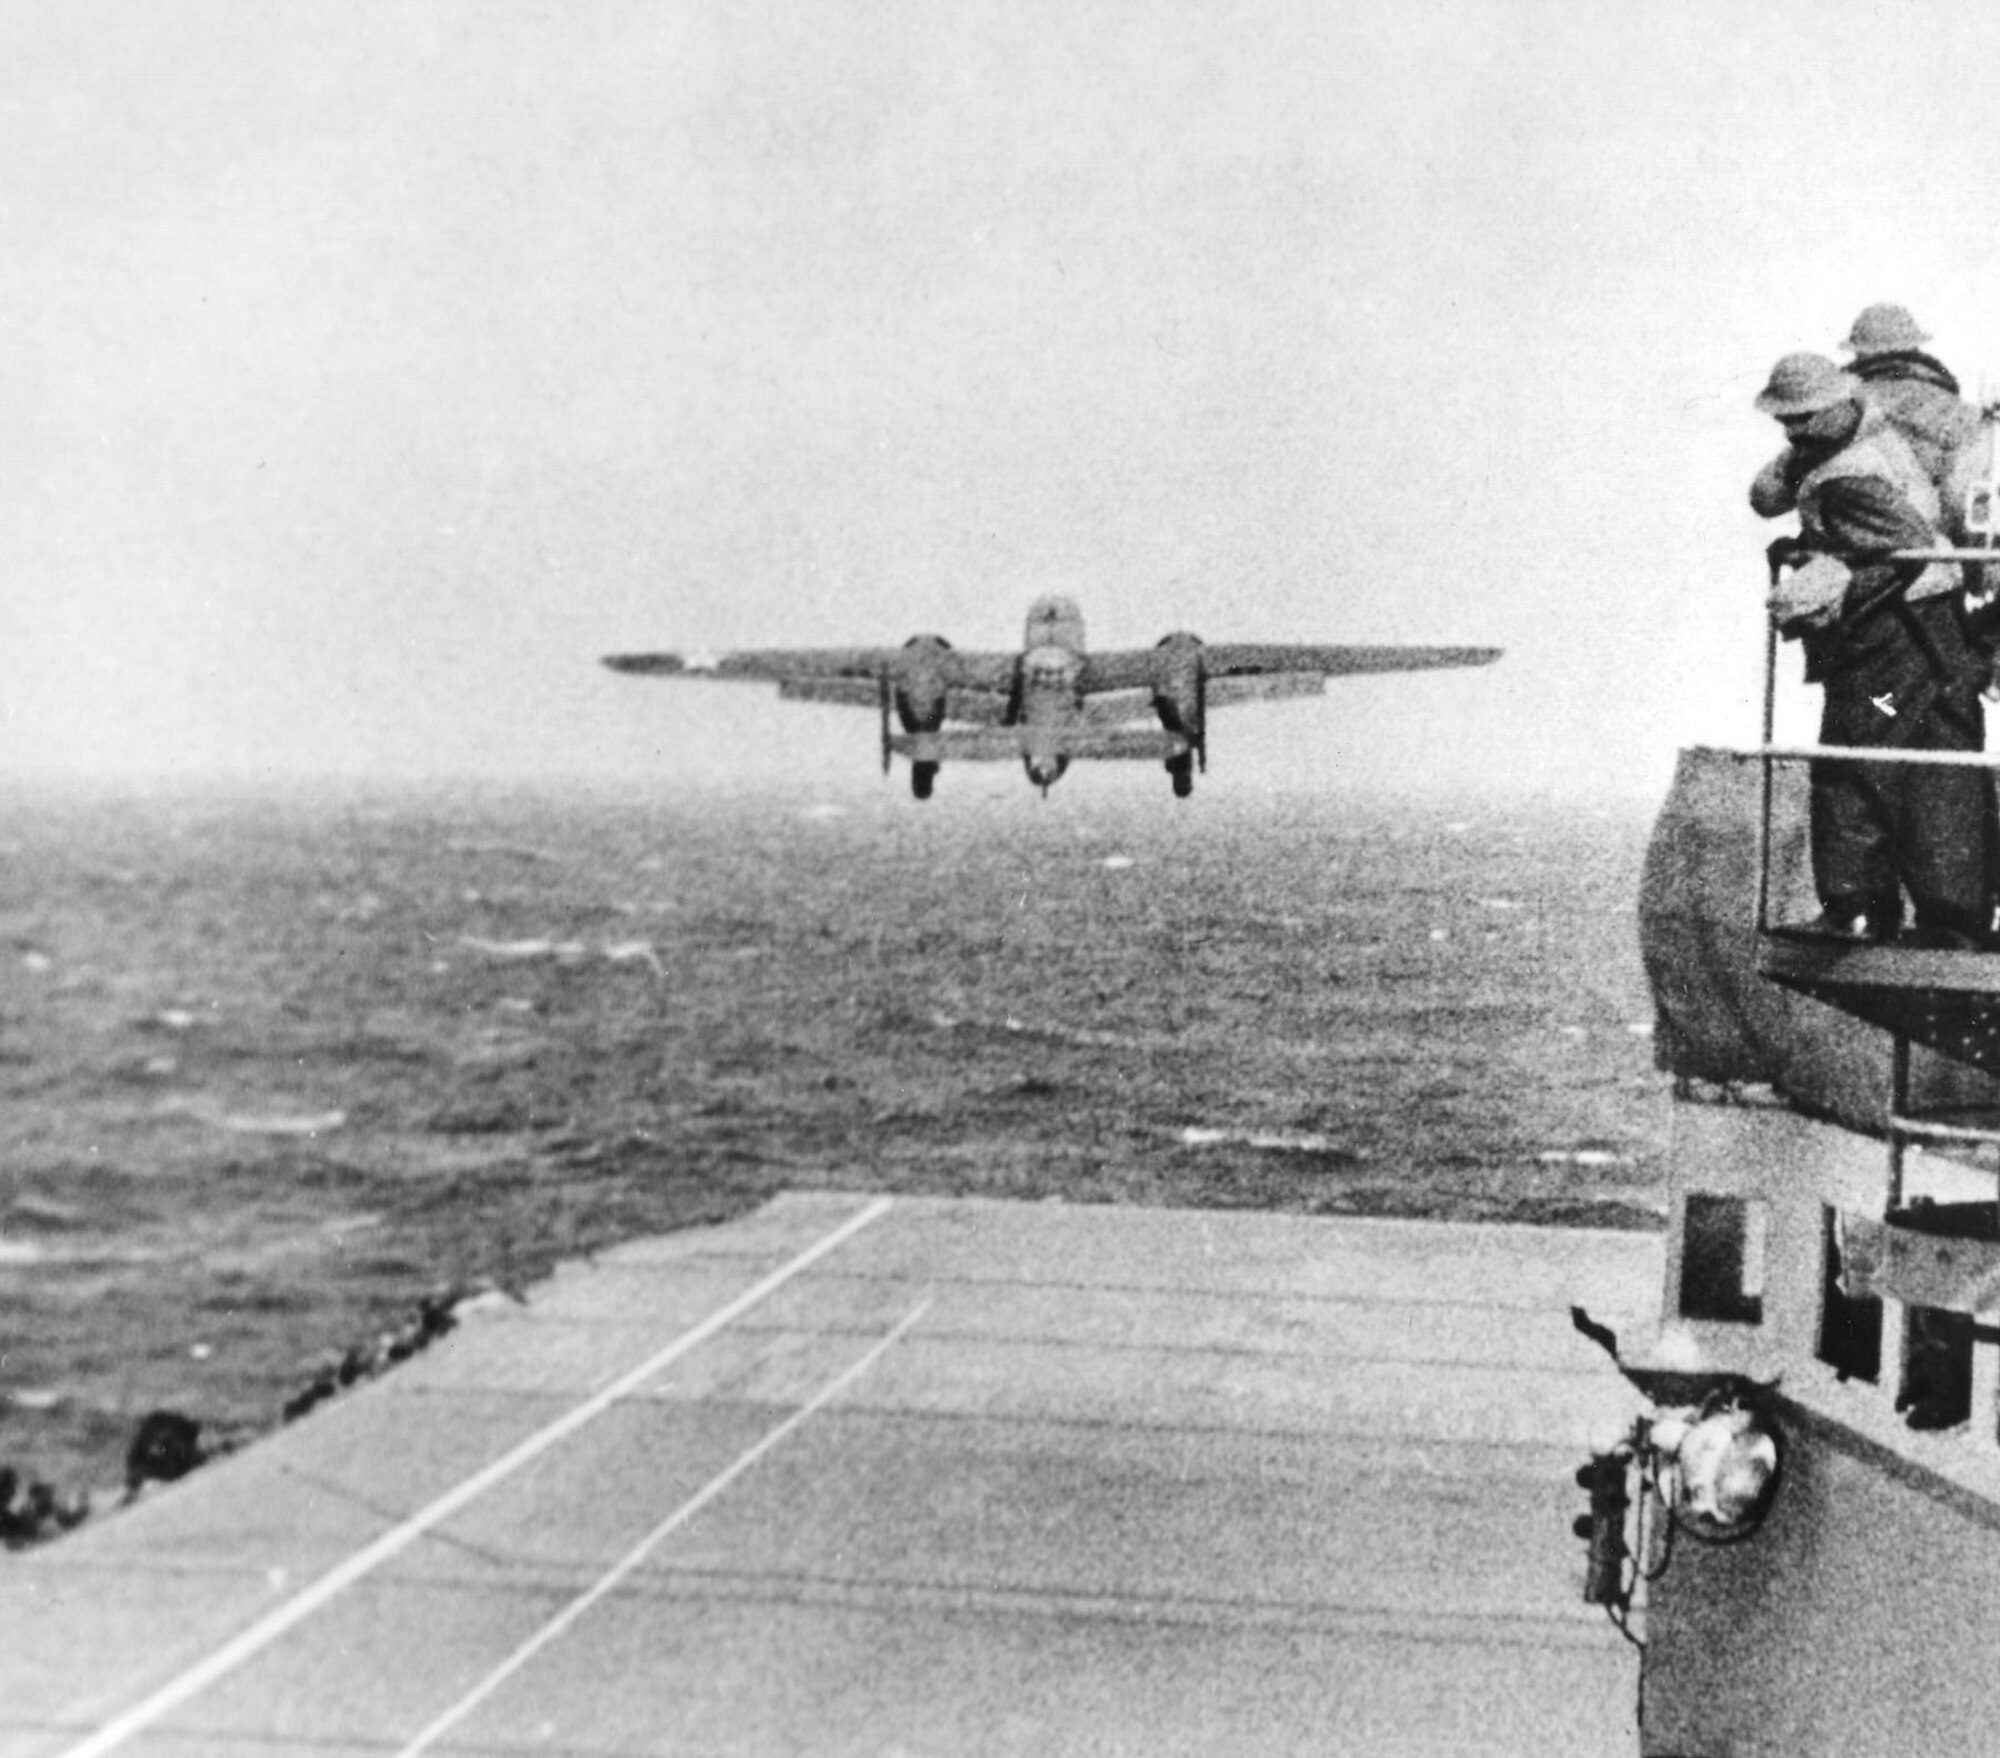 The USS Hornet had 16 U.S. Army Air Forces North American B-25B Mitchells on deck, ready for the Tokyo Raid on April 18, 1942. (U.S. Air Force photo)